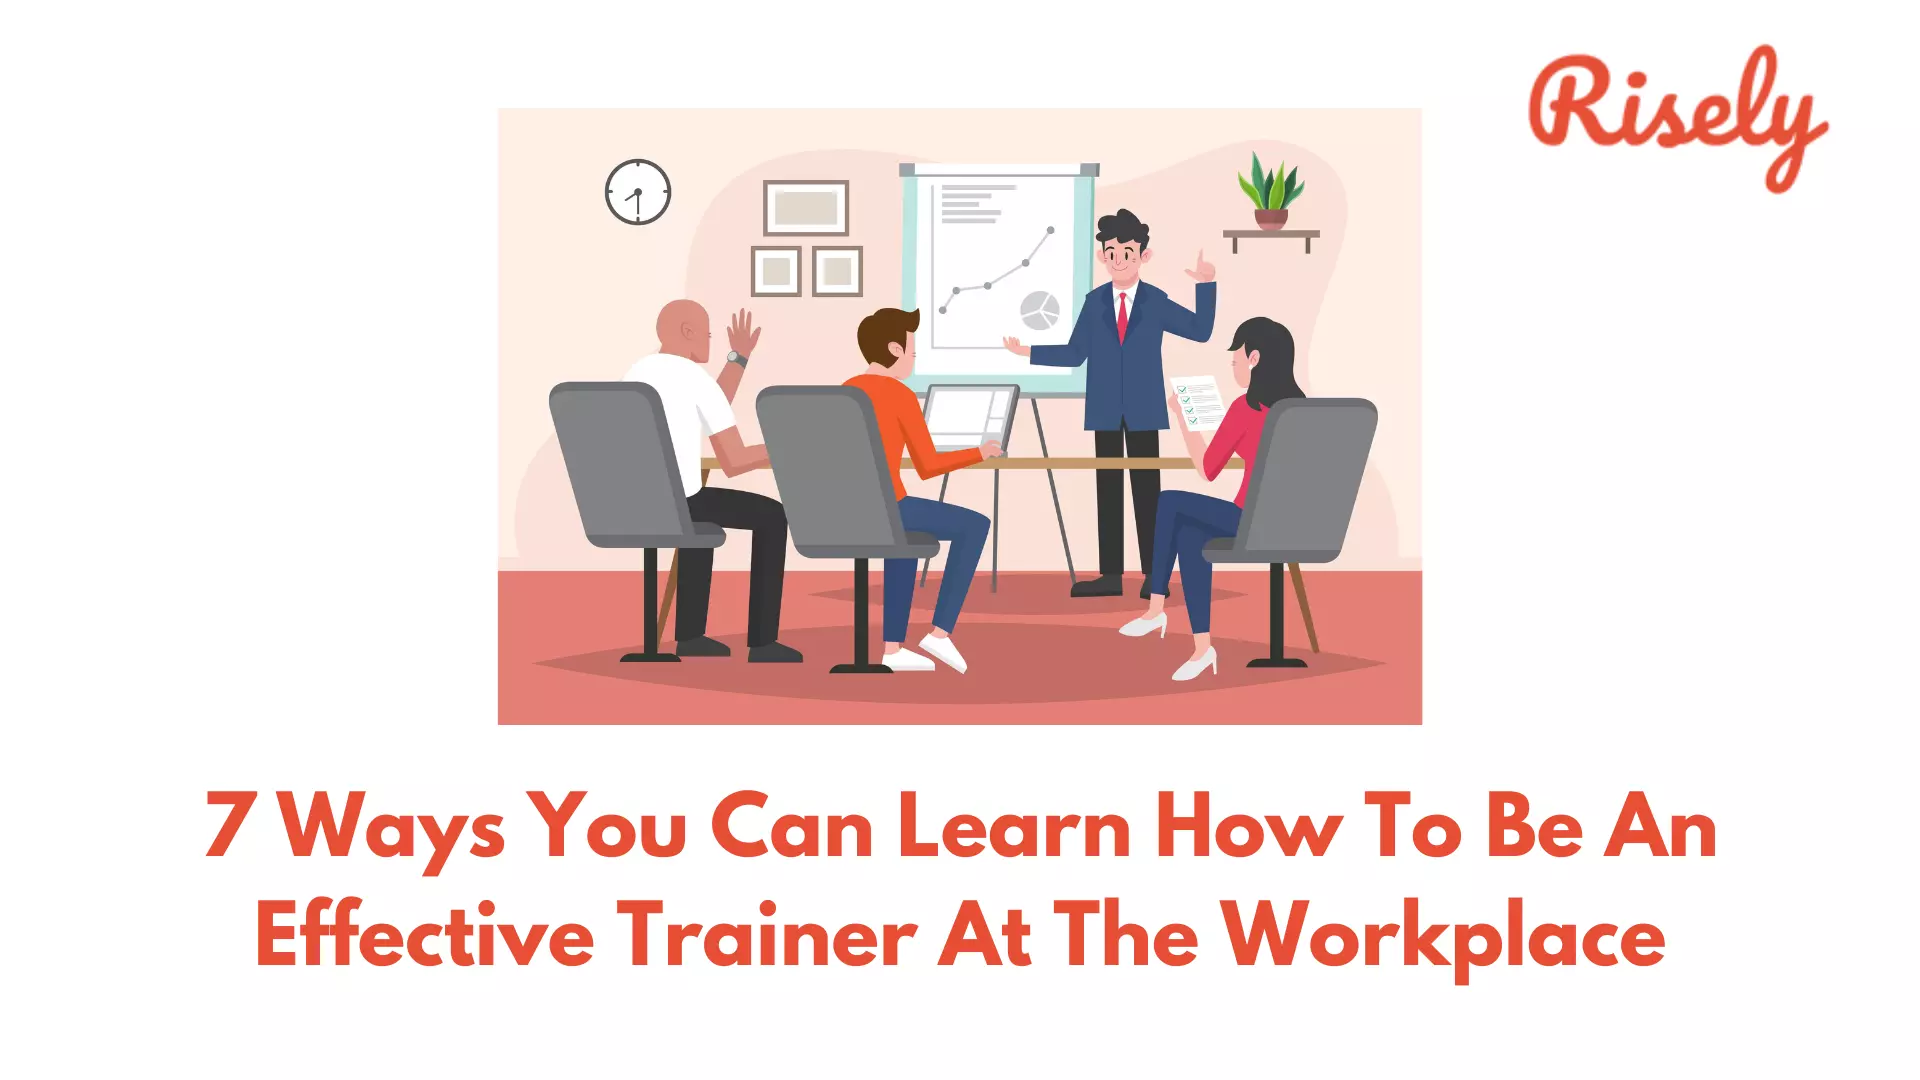 How to be an effective trainer